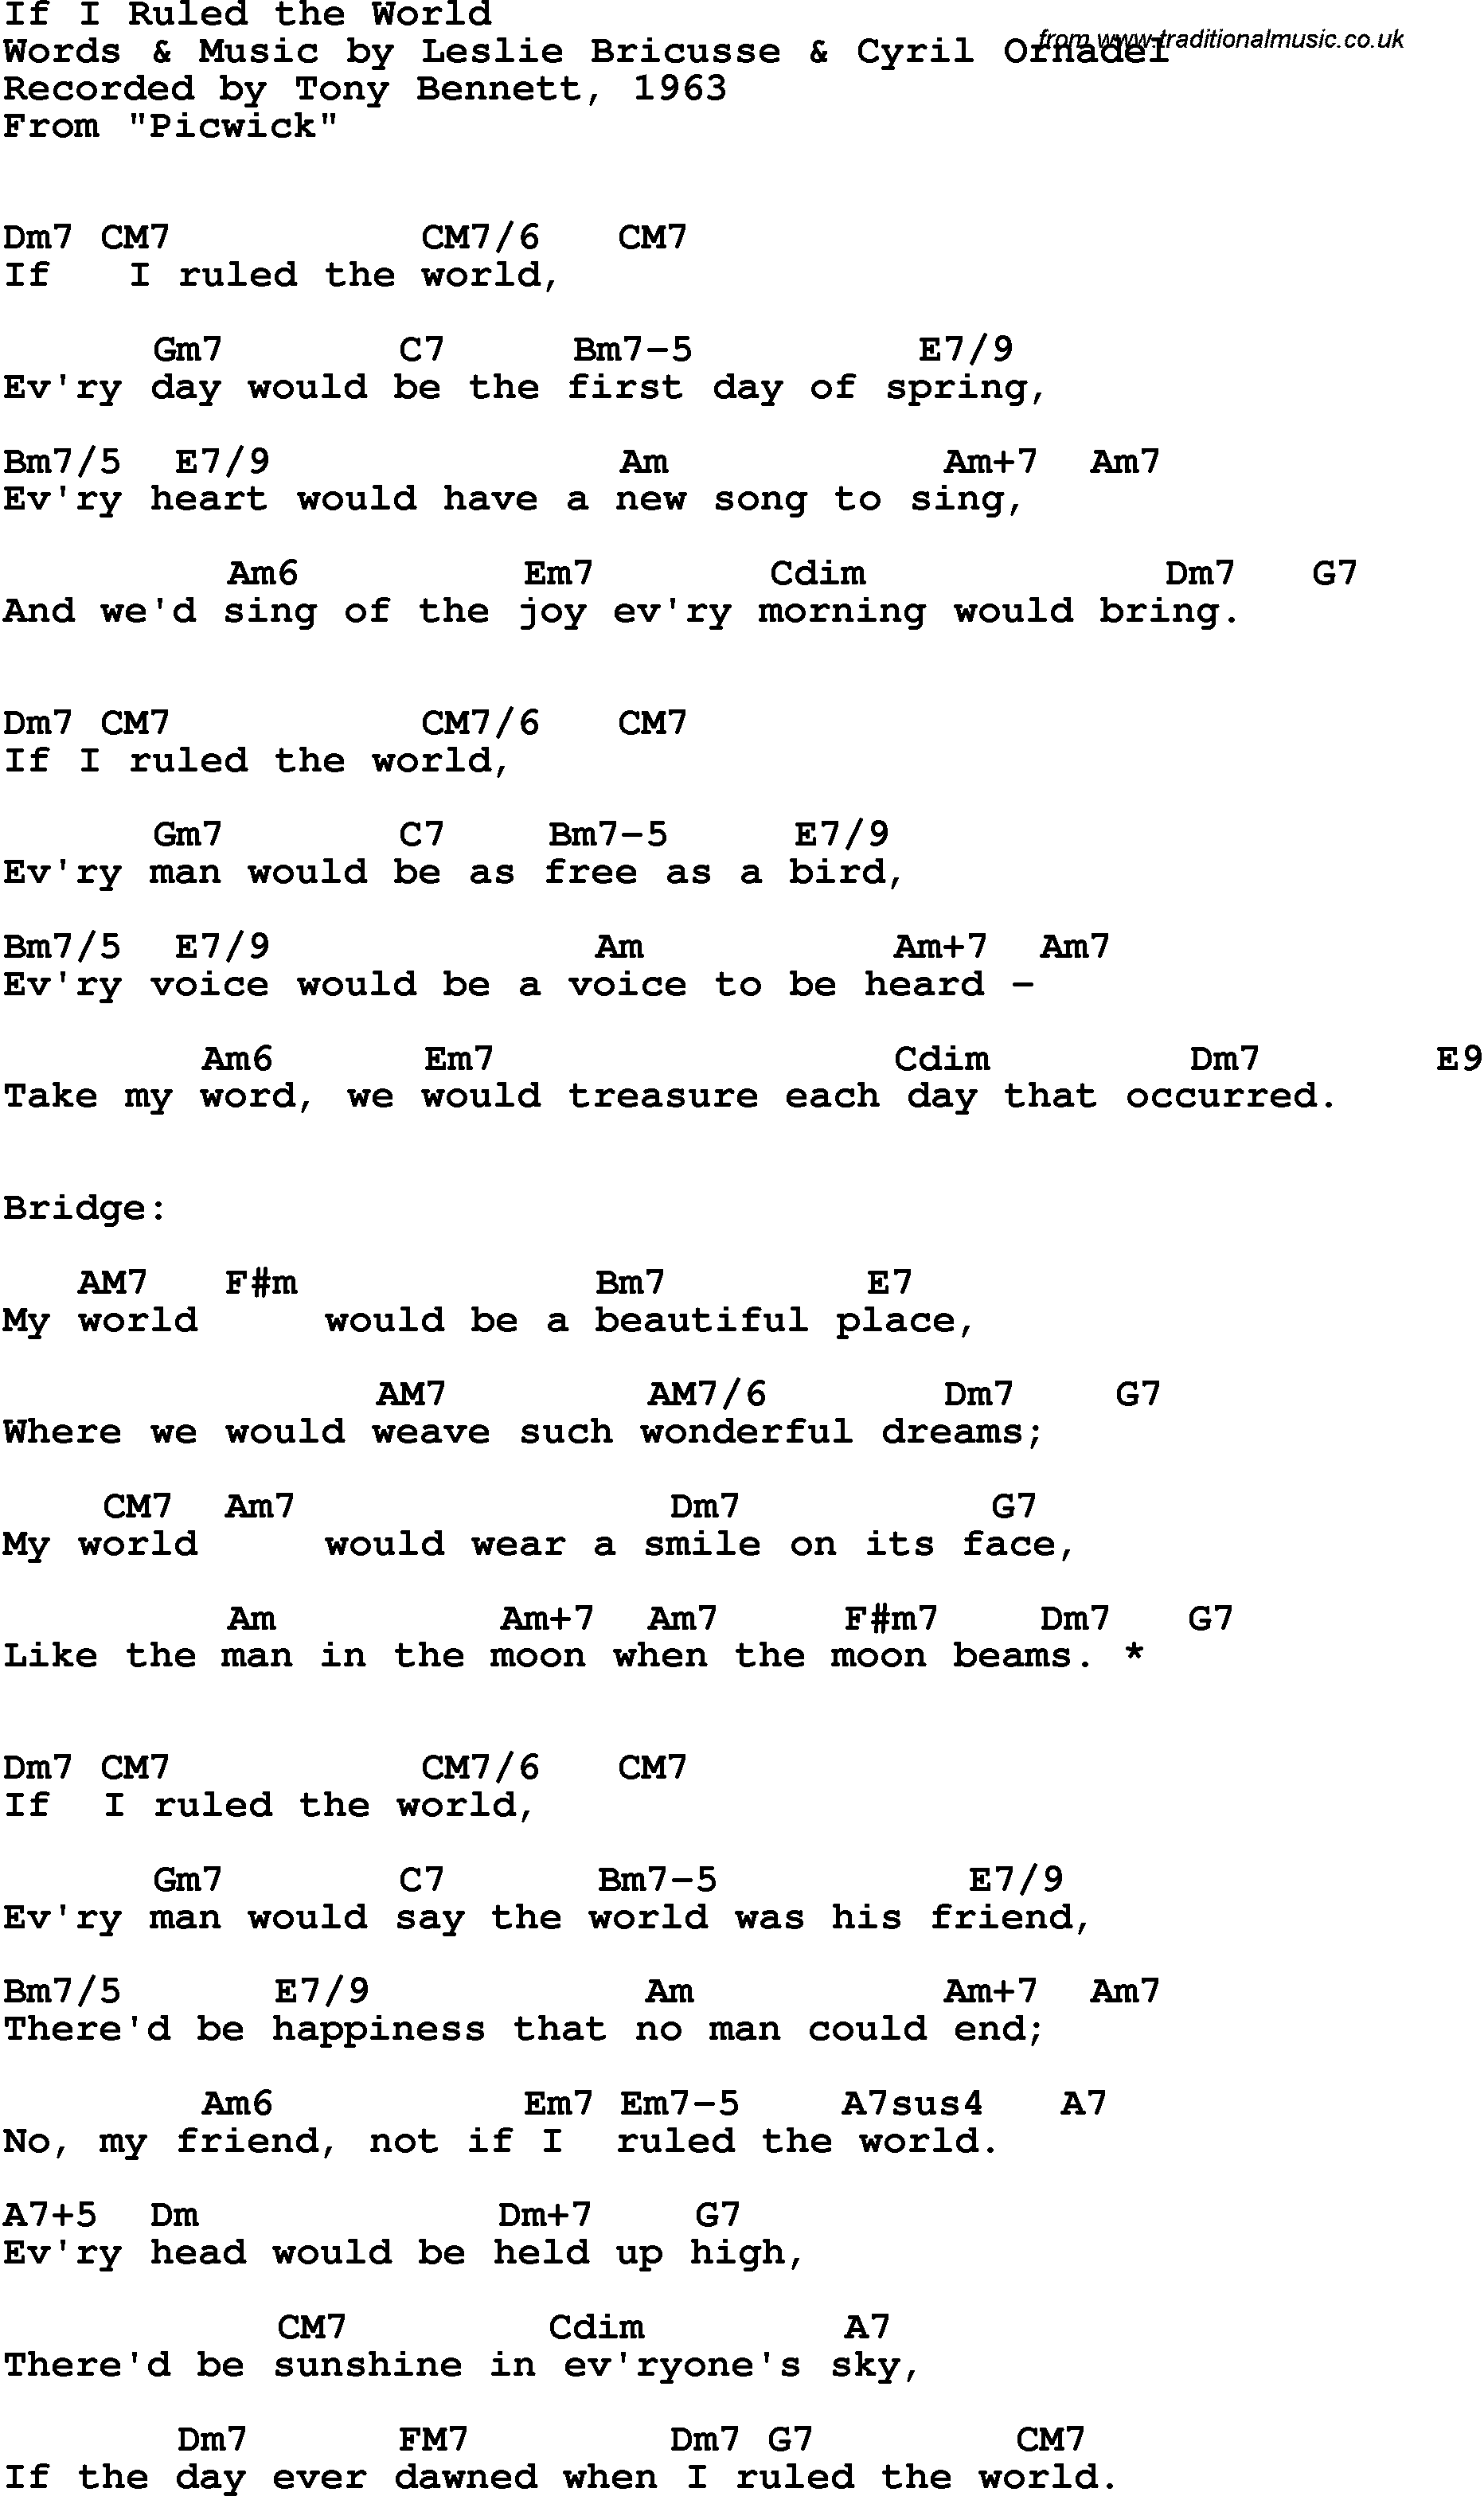 Song Lyrics with guitar chords for If I Ruled The World - Tony Bennett, 1963